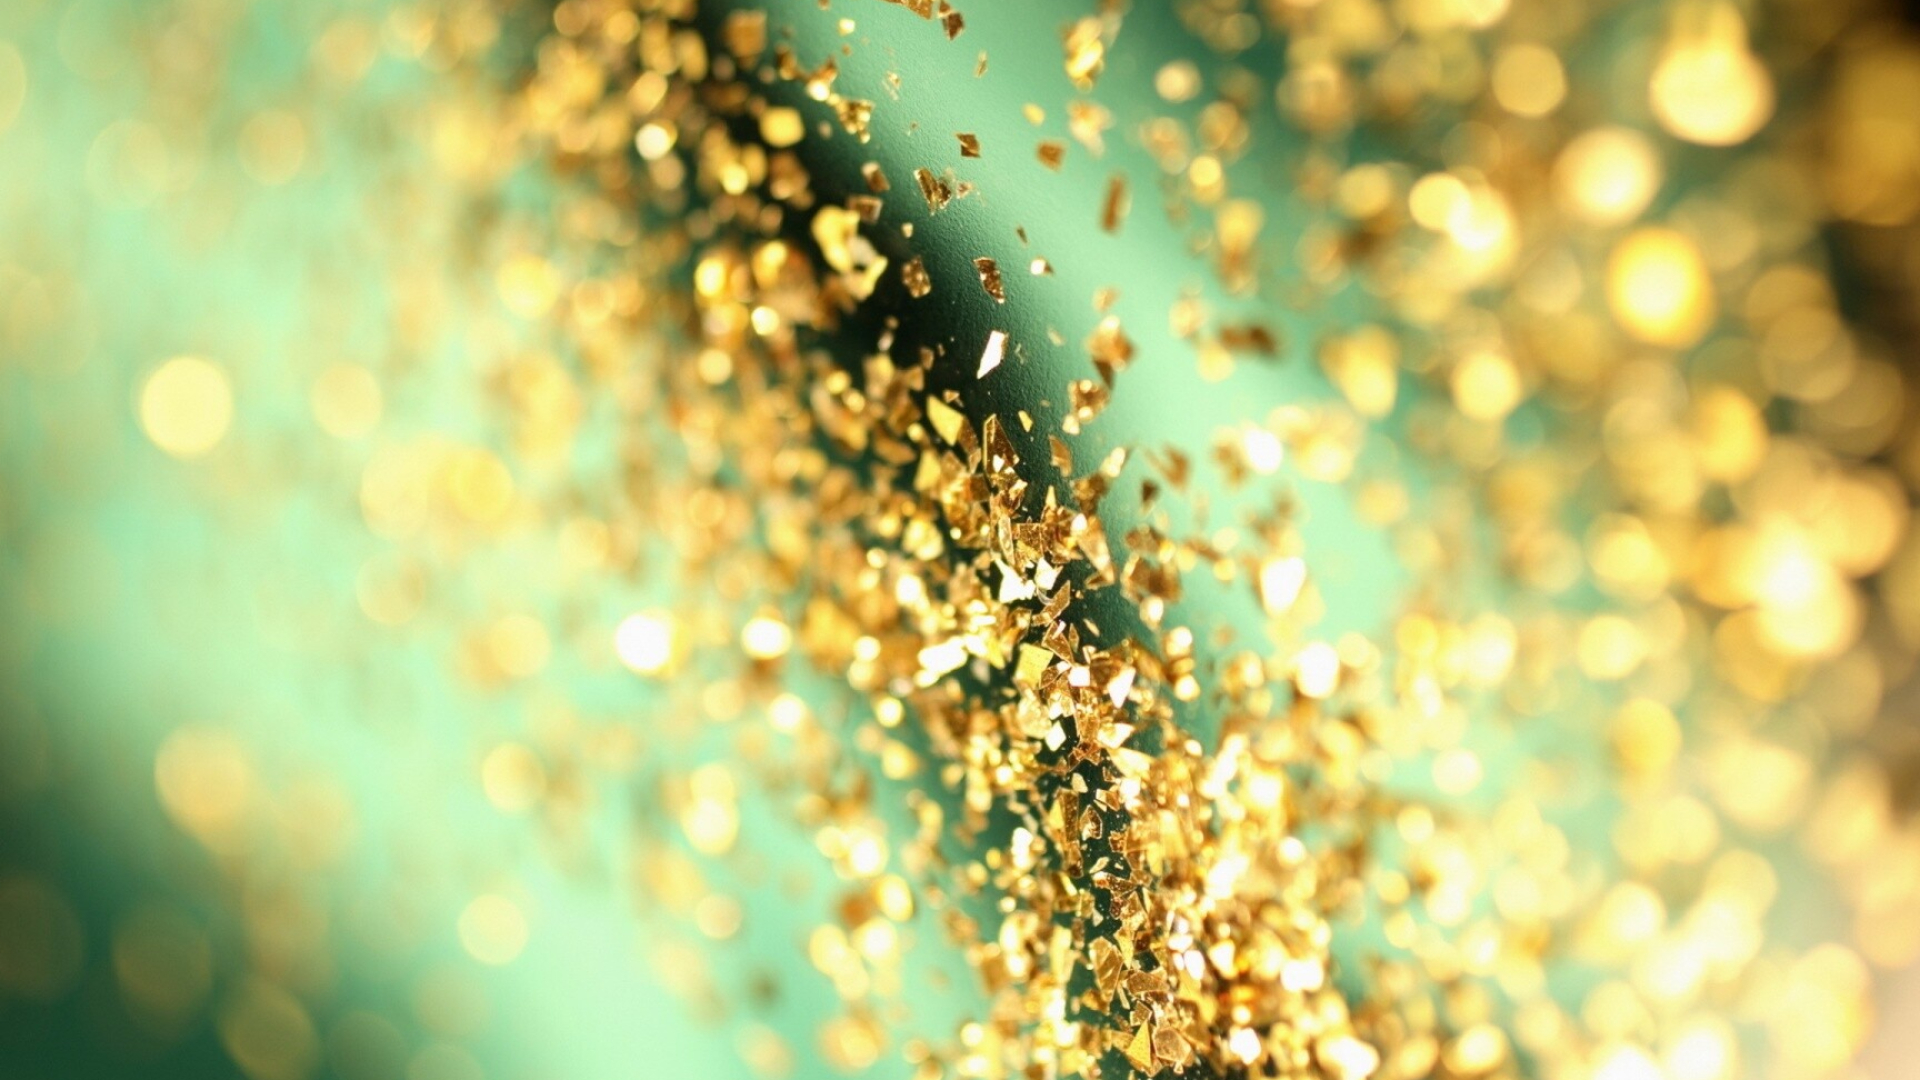 Gold: Shining metallic pieces, Golden shimmer, Sparkling material. 1920x1080 Full HD Background.